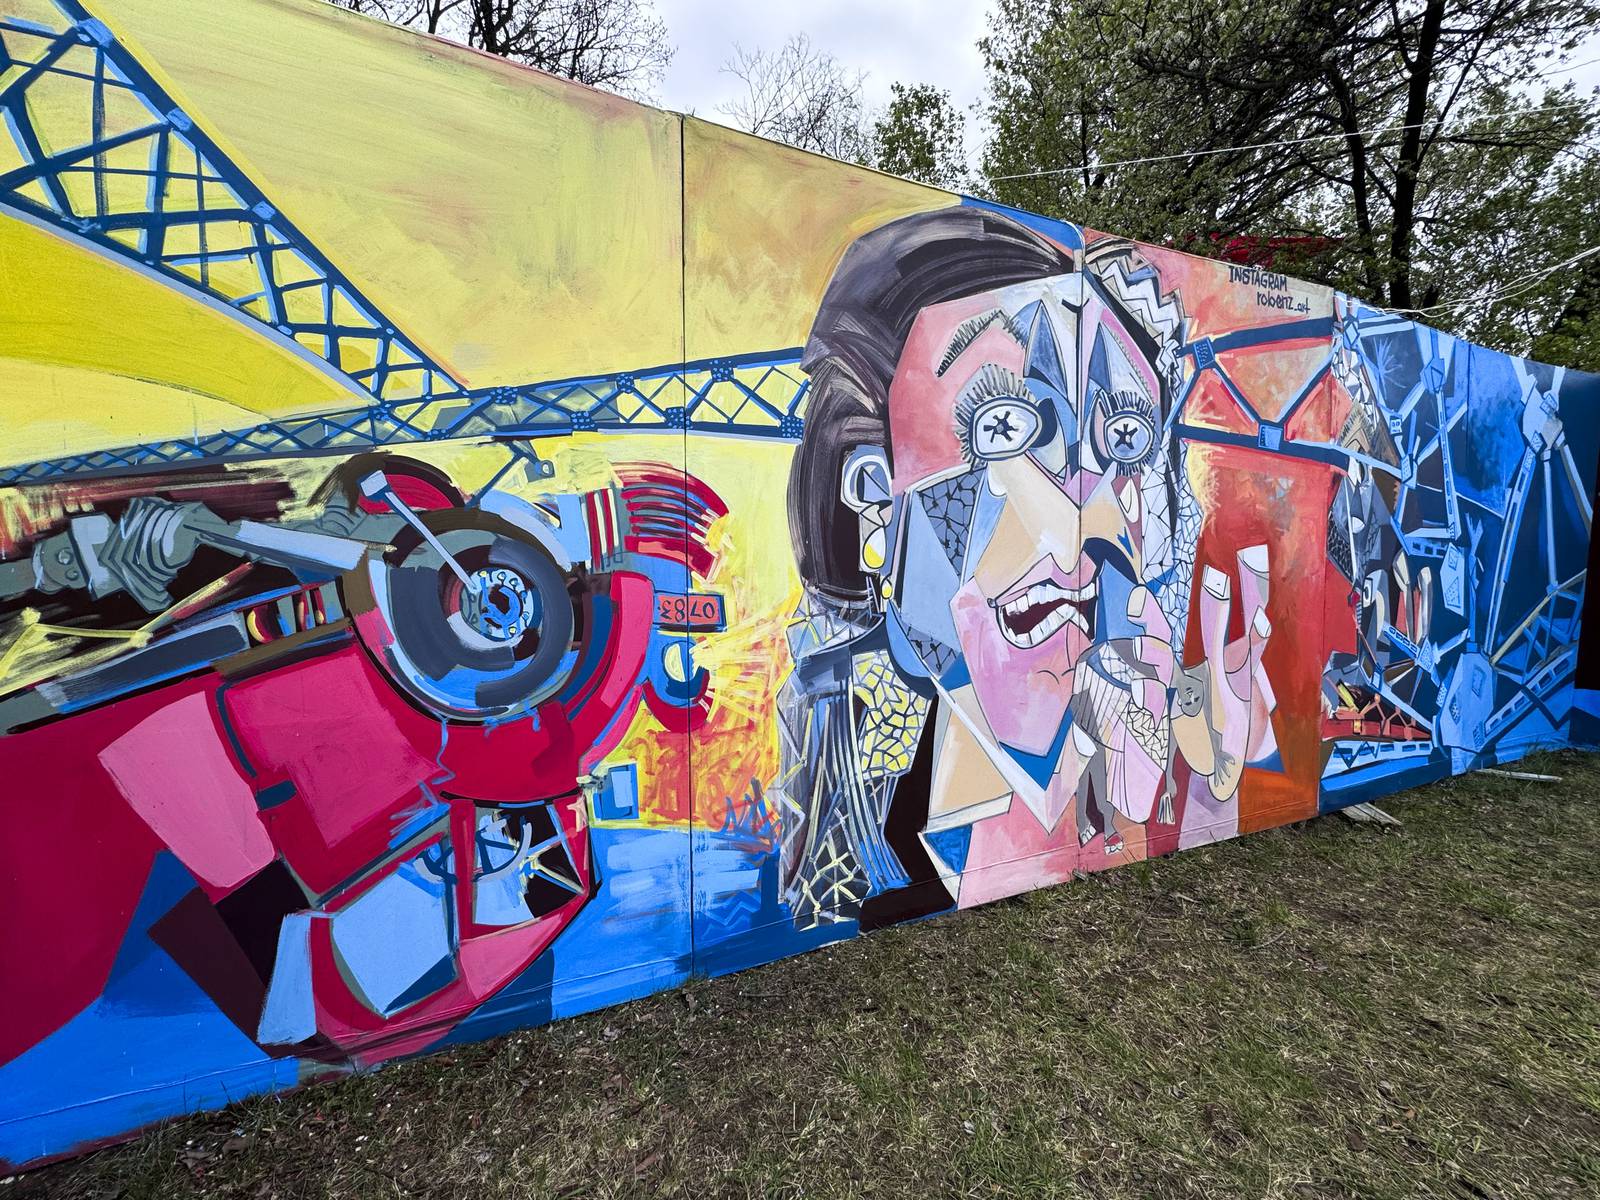 Roberto Marquez, an artist from Dallas, TX, painted a mural in their honor as well as painted their names on several crosses dotting the perimeter of flowers, candles, and othe mementos of remembrance. Members of the community honored the victims through prayer and song on April 6, 2024.